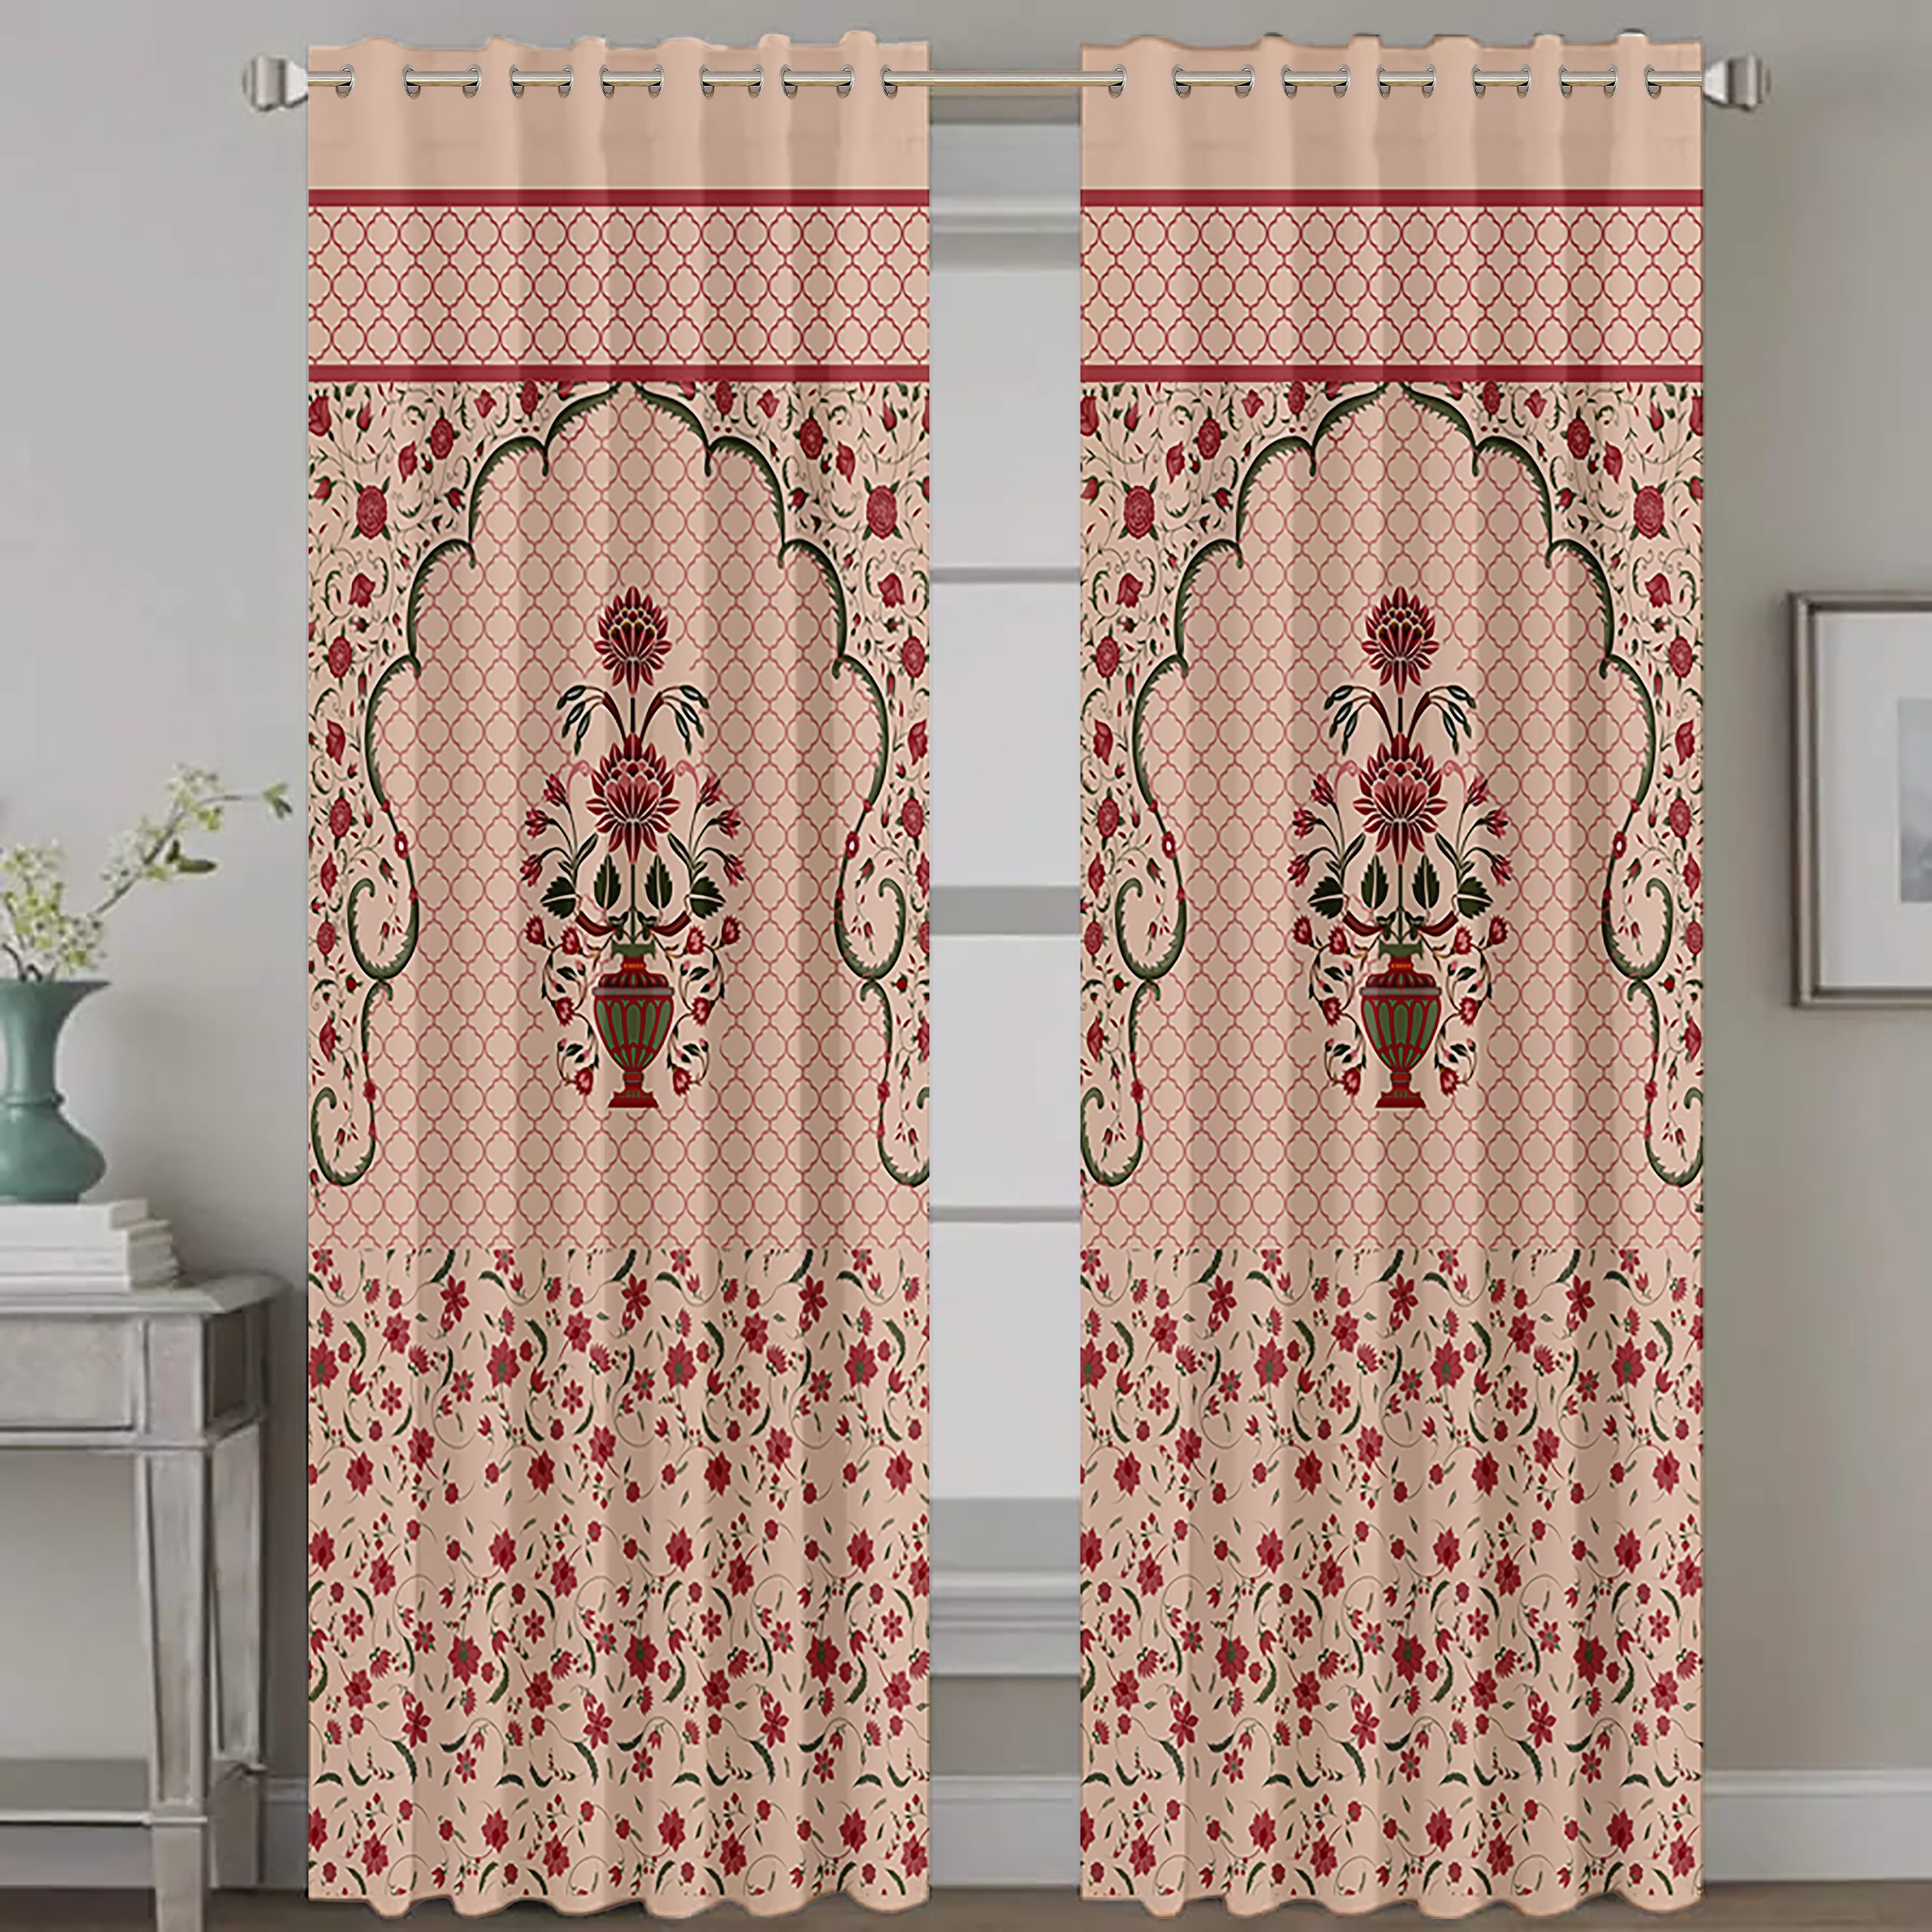 Homewards Mughal Arch with jaal background Daylight saving  Eyelet Curtain in length 7ft (set of 2)